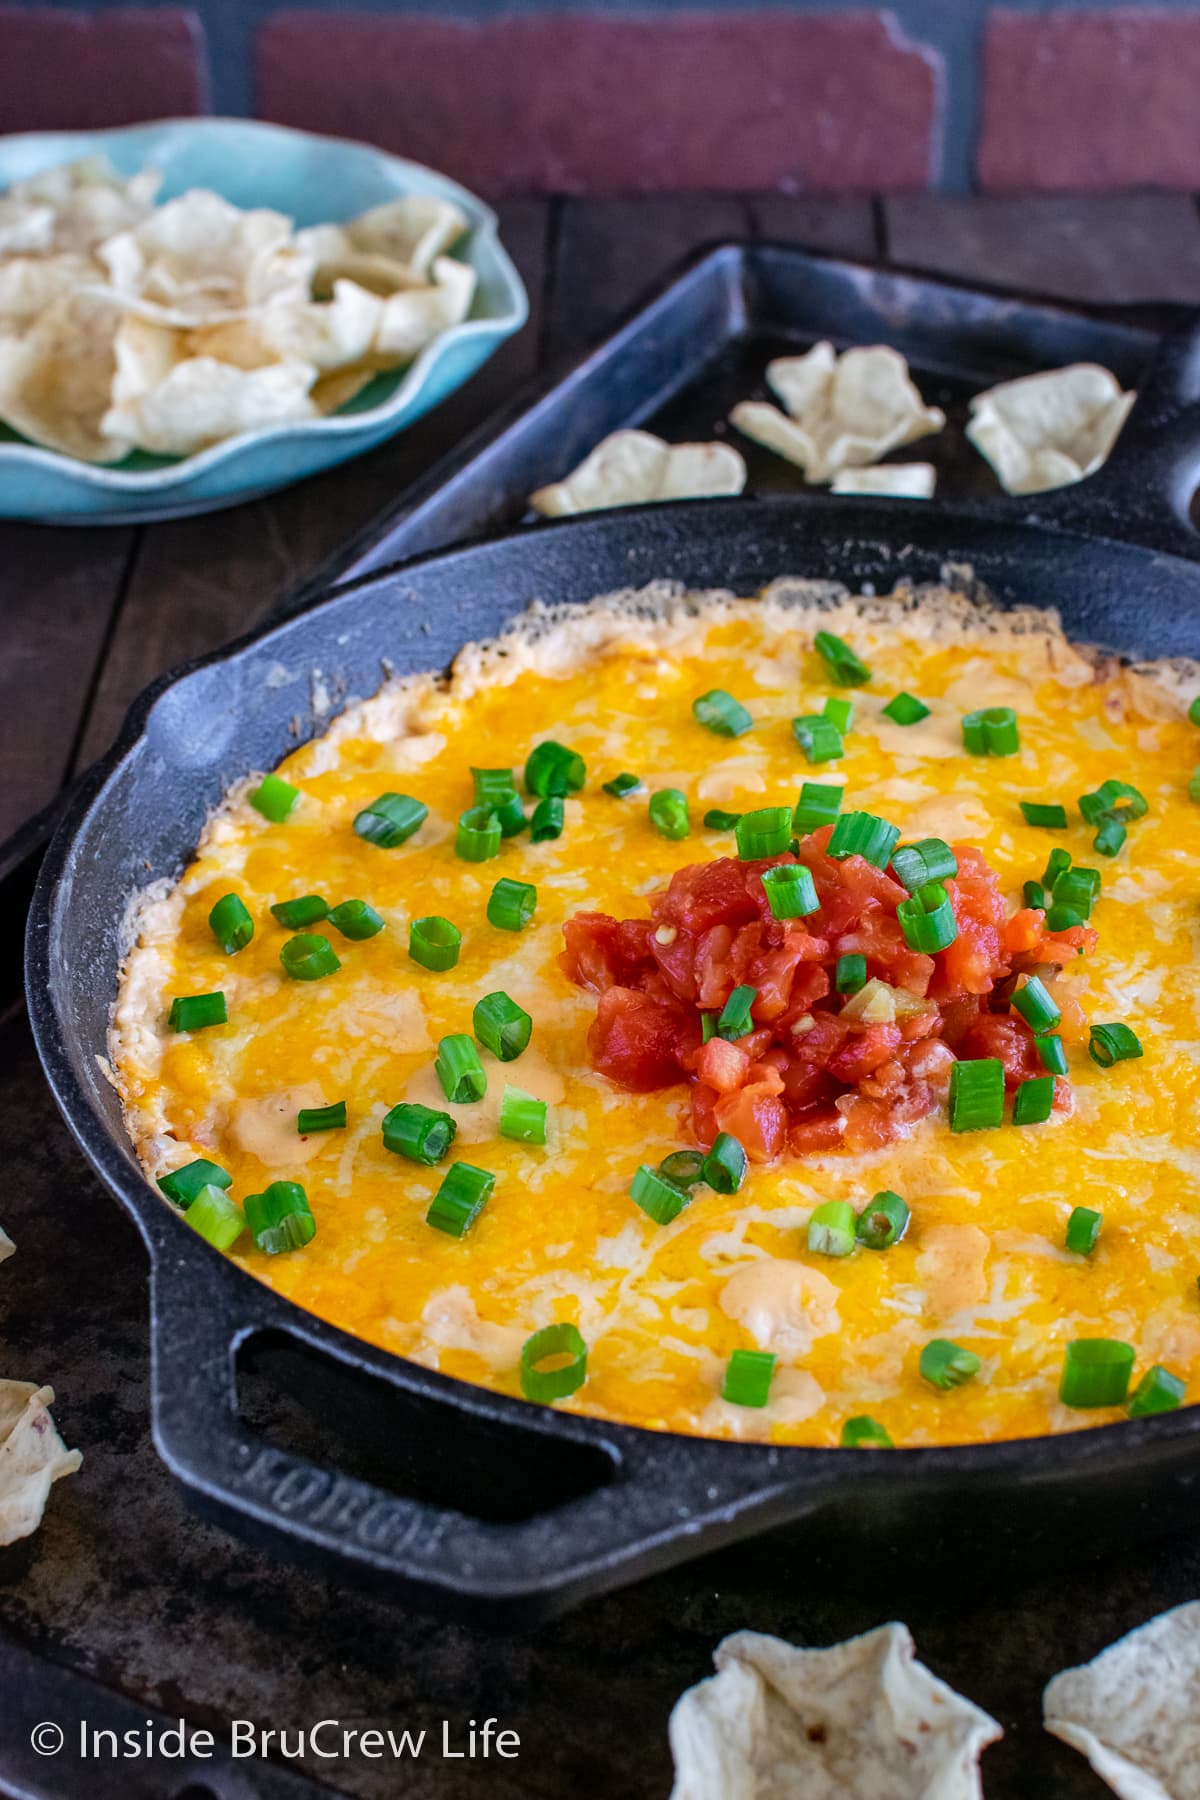 A cast iron skillet filled with a melted hot corn dip.